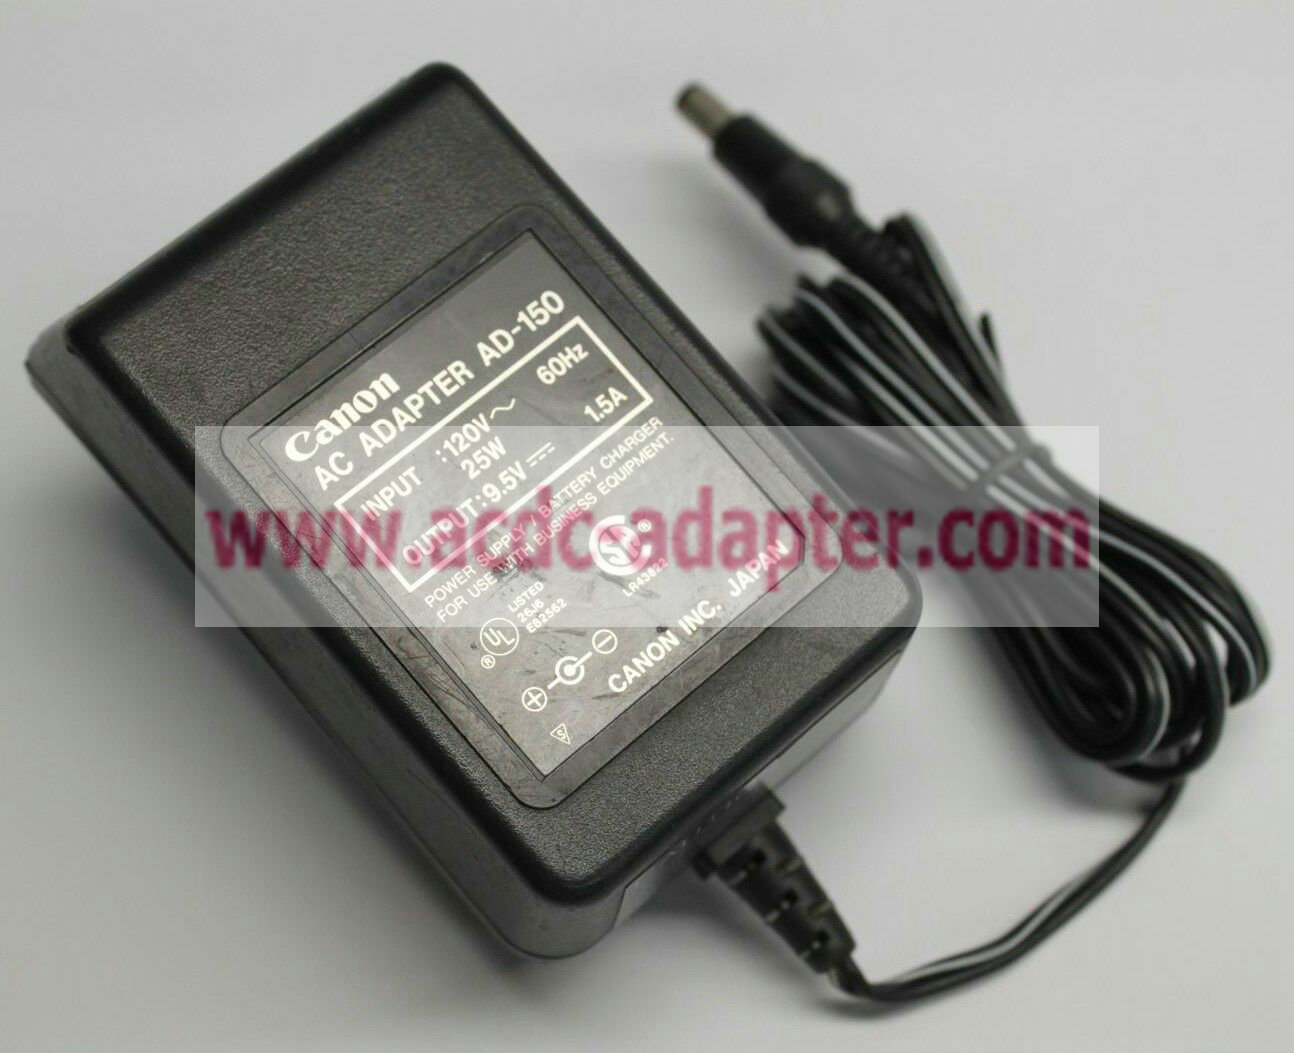 New DC 9.5V 1.5A 30W AC Adapter for Canon AD-150 Power Supply Battery Charger